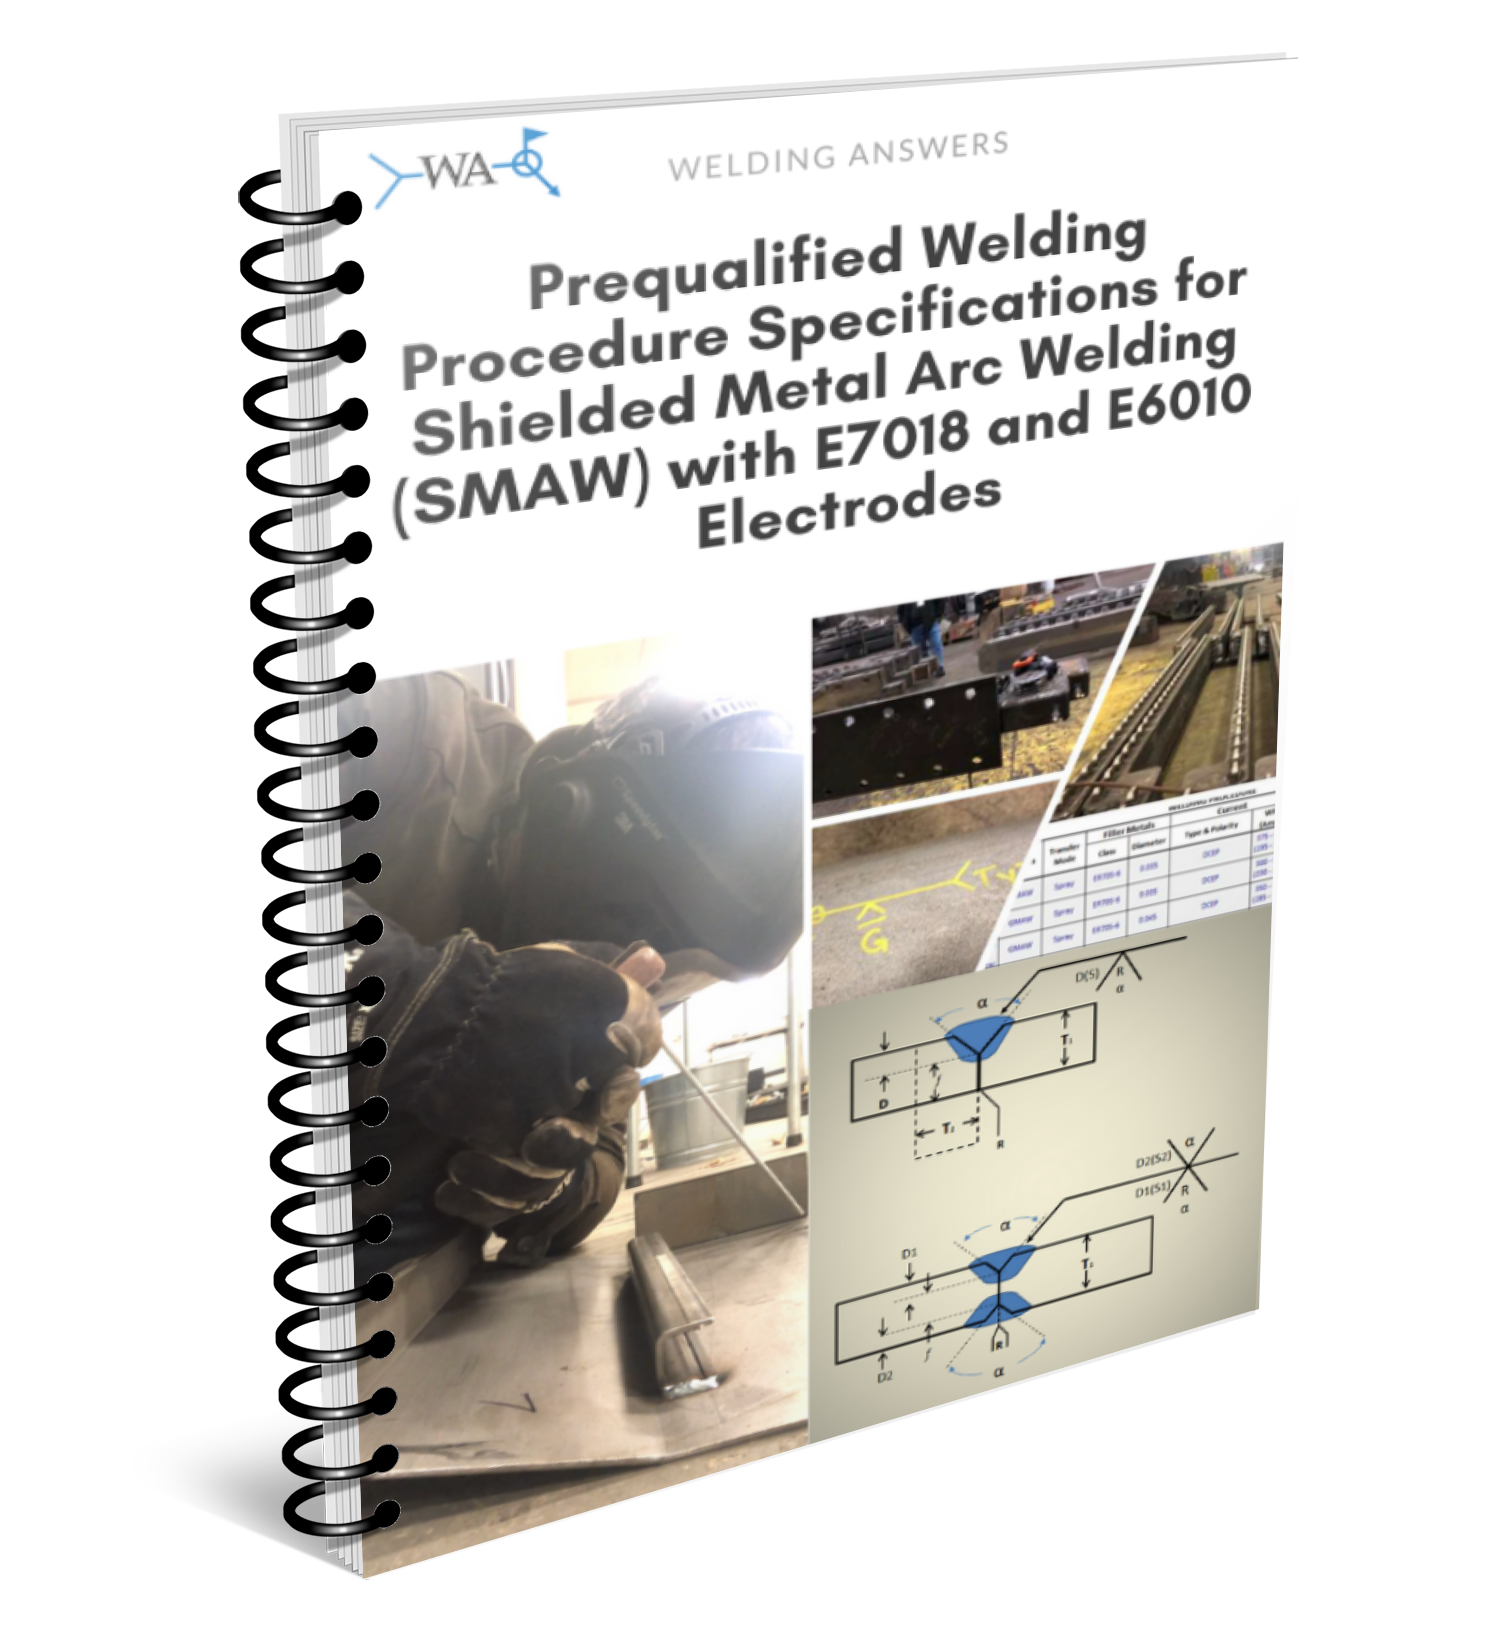 Are you looking for welding procedures for E6010 and/or E7018 stick processes? Click the image above to get 48 Prequalified WPSs for SMAW in conformance with AWS D1.1 Structural Welding Code.